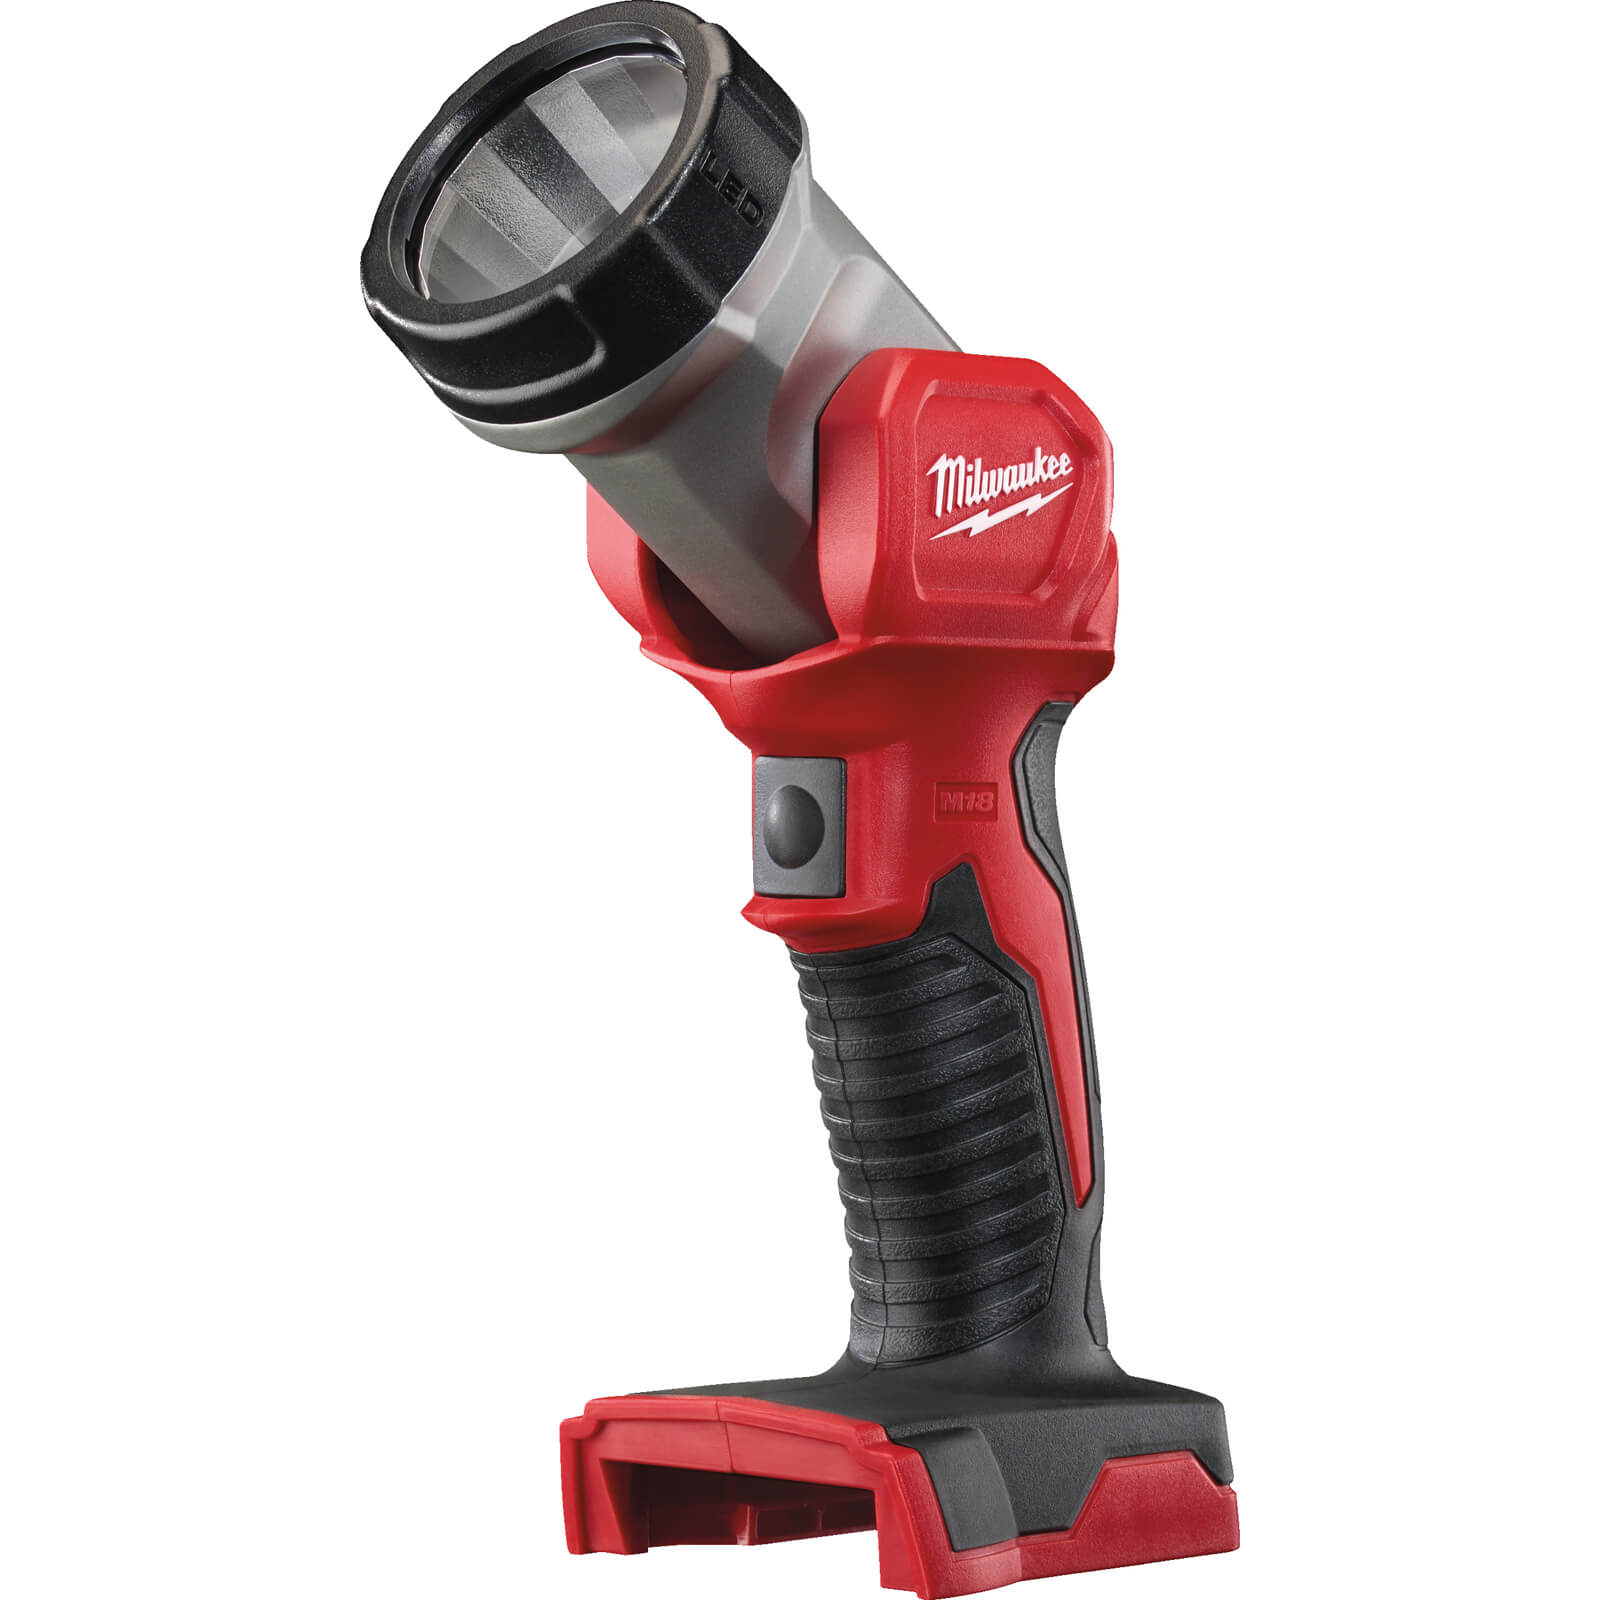 Image of Milwaukee M18 TLED 18v Trueview Cordless LED Torch No Batteries No Charger No Case